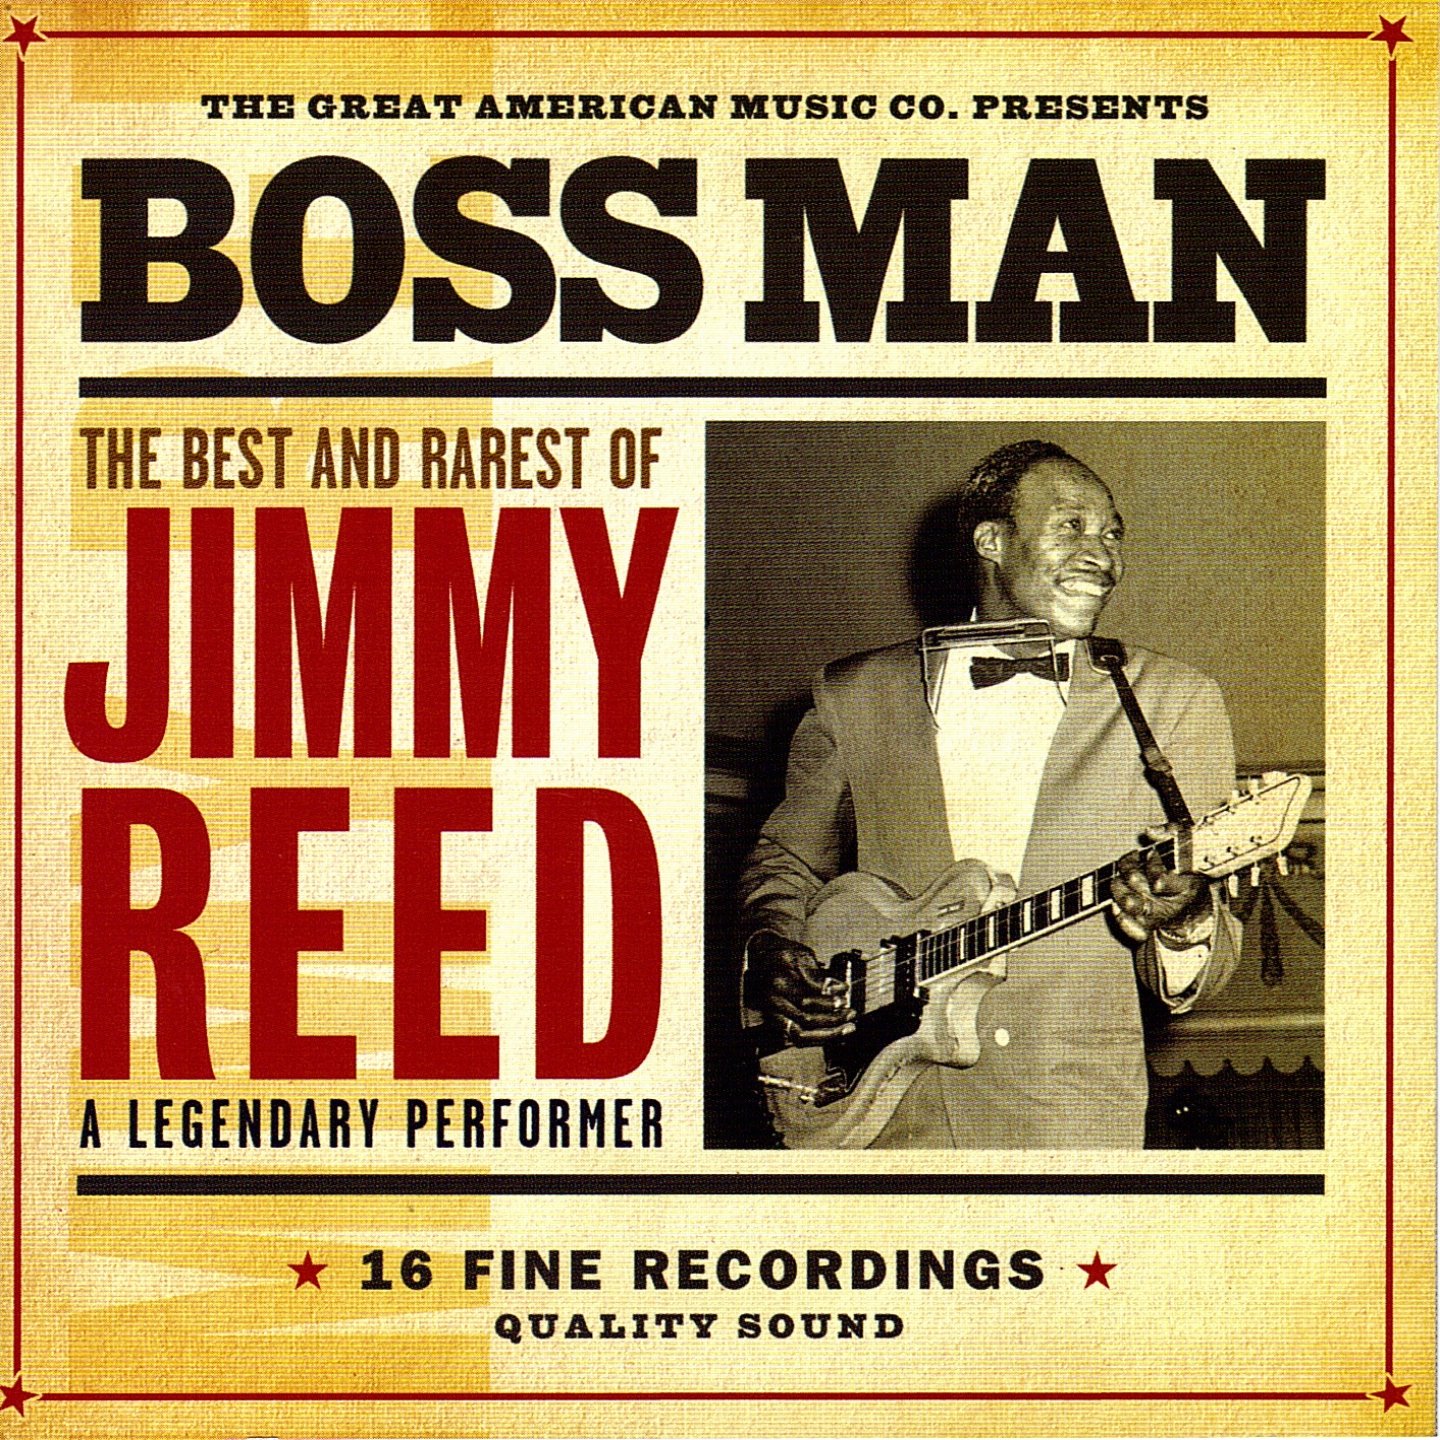 Рид текст. Jimmy Reed "Rockin' with Reed". Jimmy rare. Википедия обложка Джимми. The best Guitar solo.